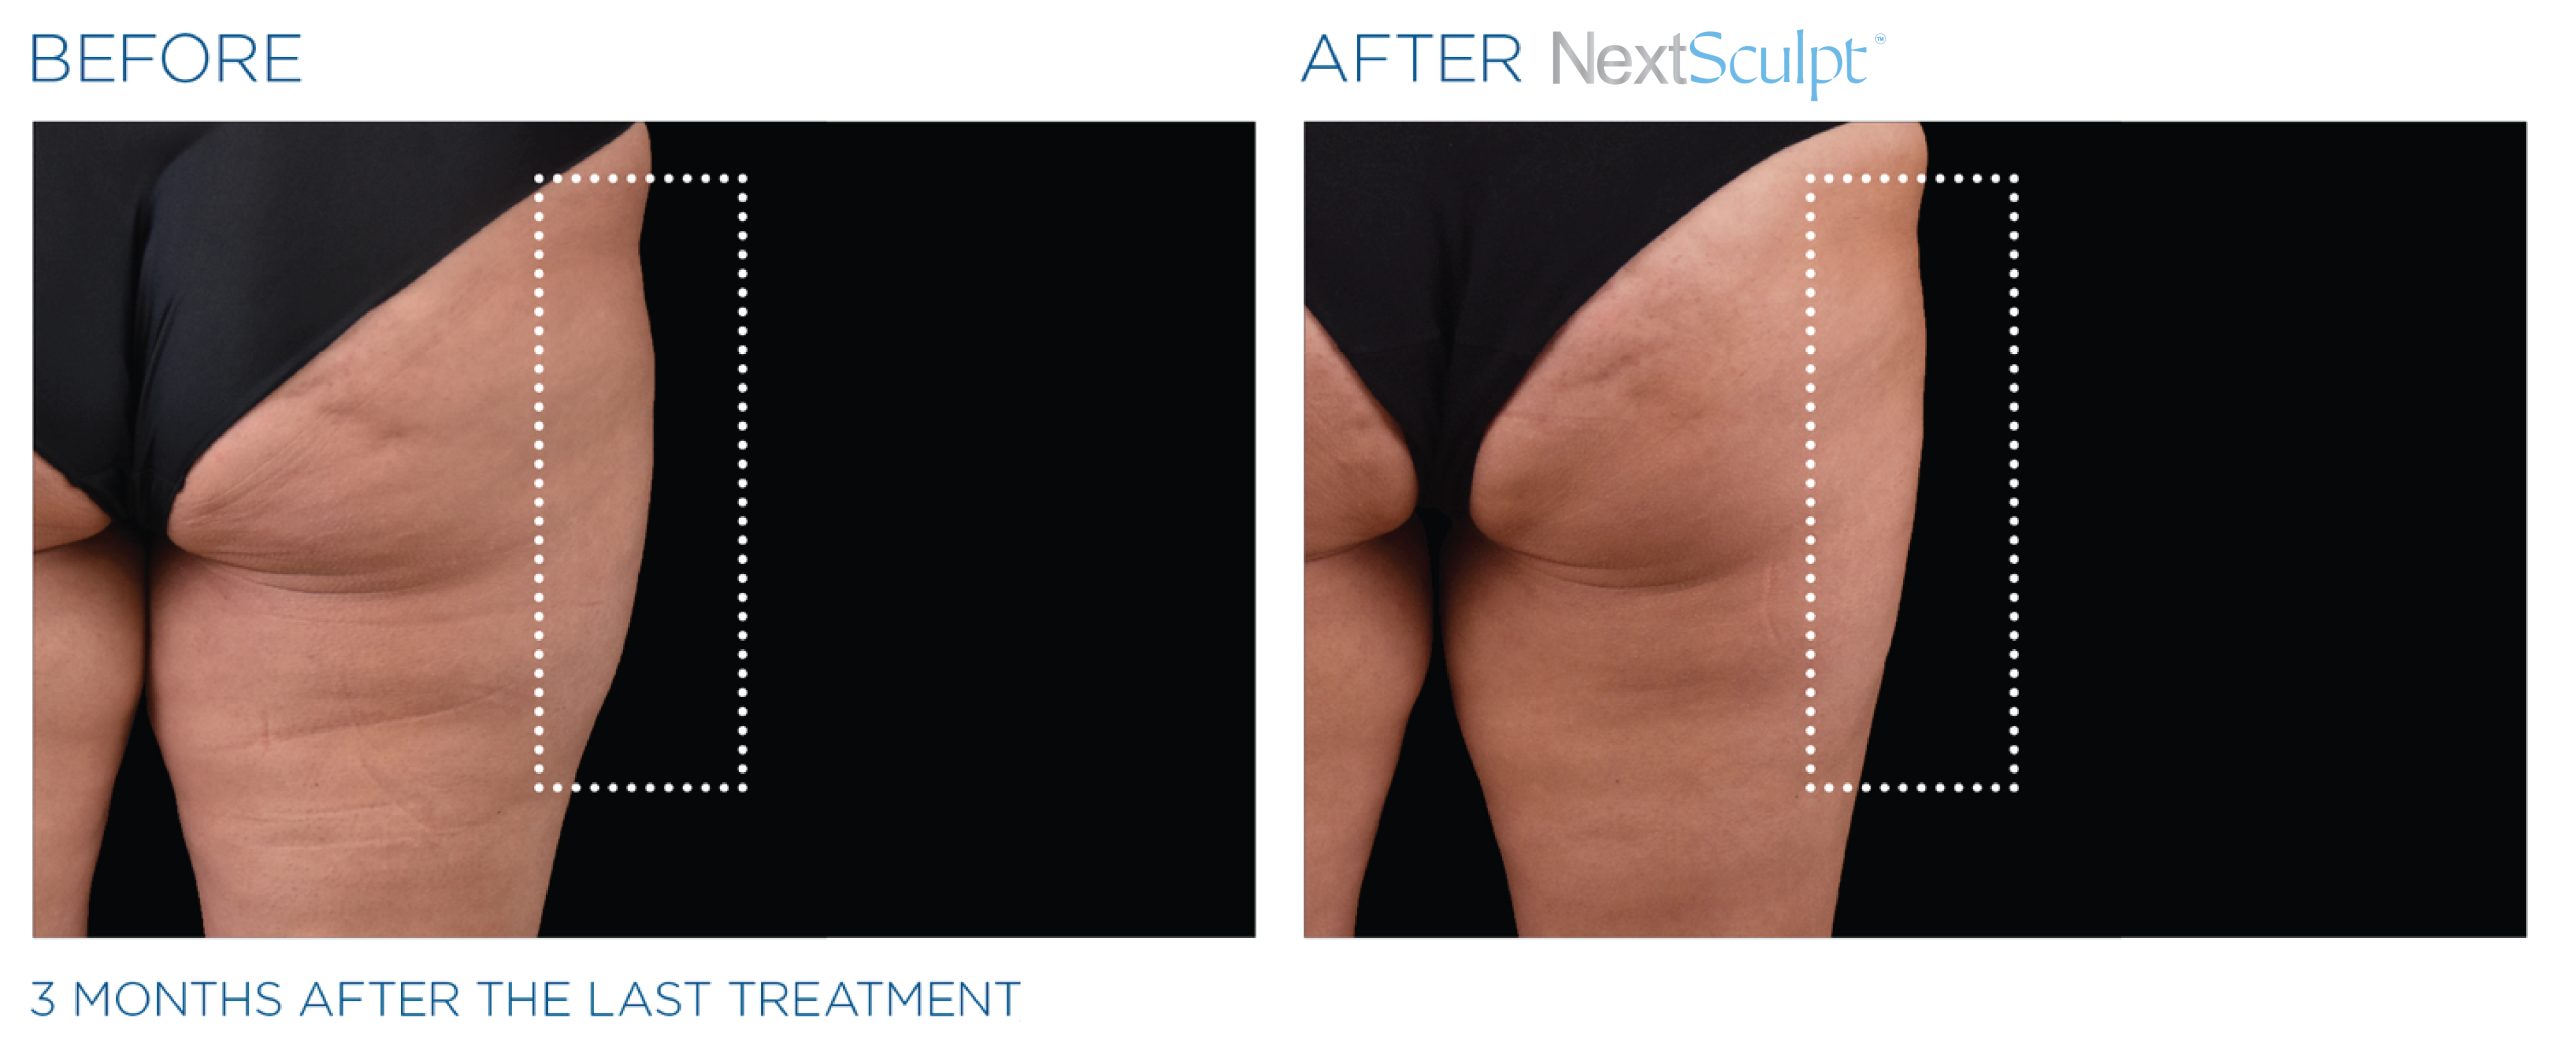 nextsculpt-before-after-07-scaled.jpg